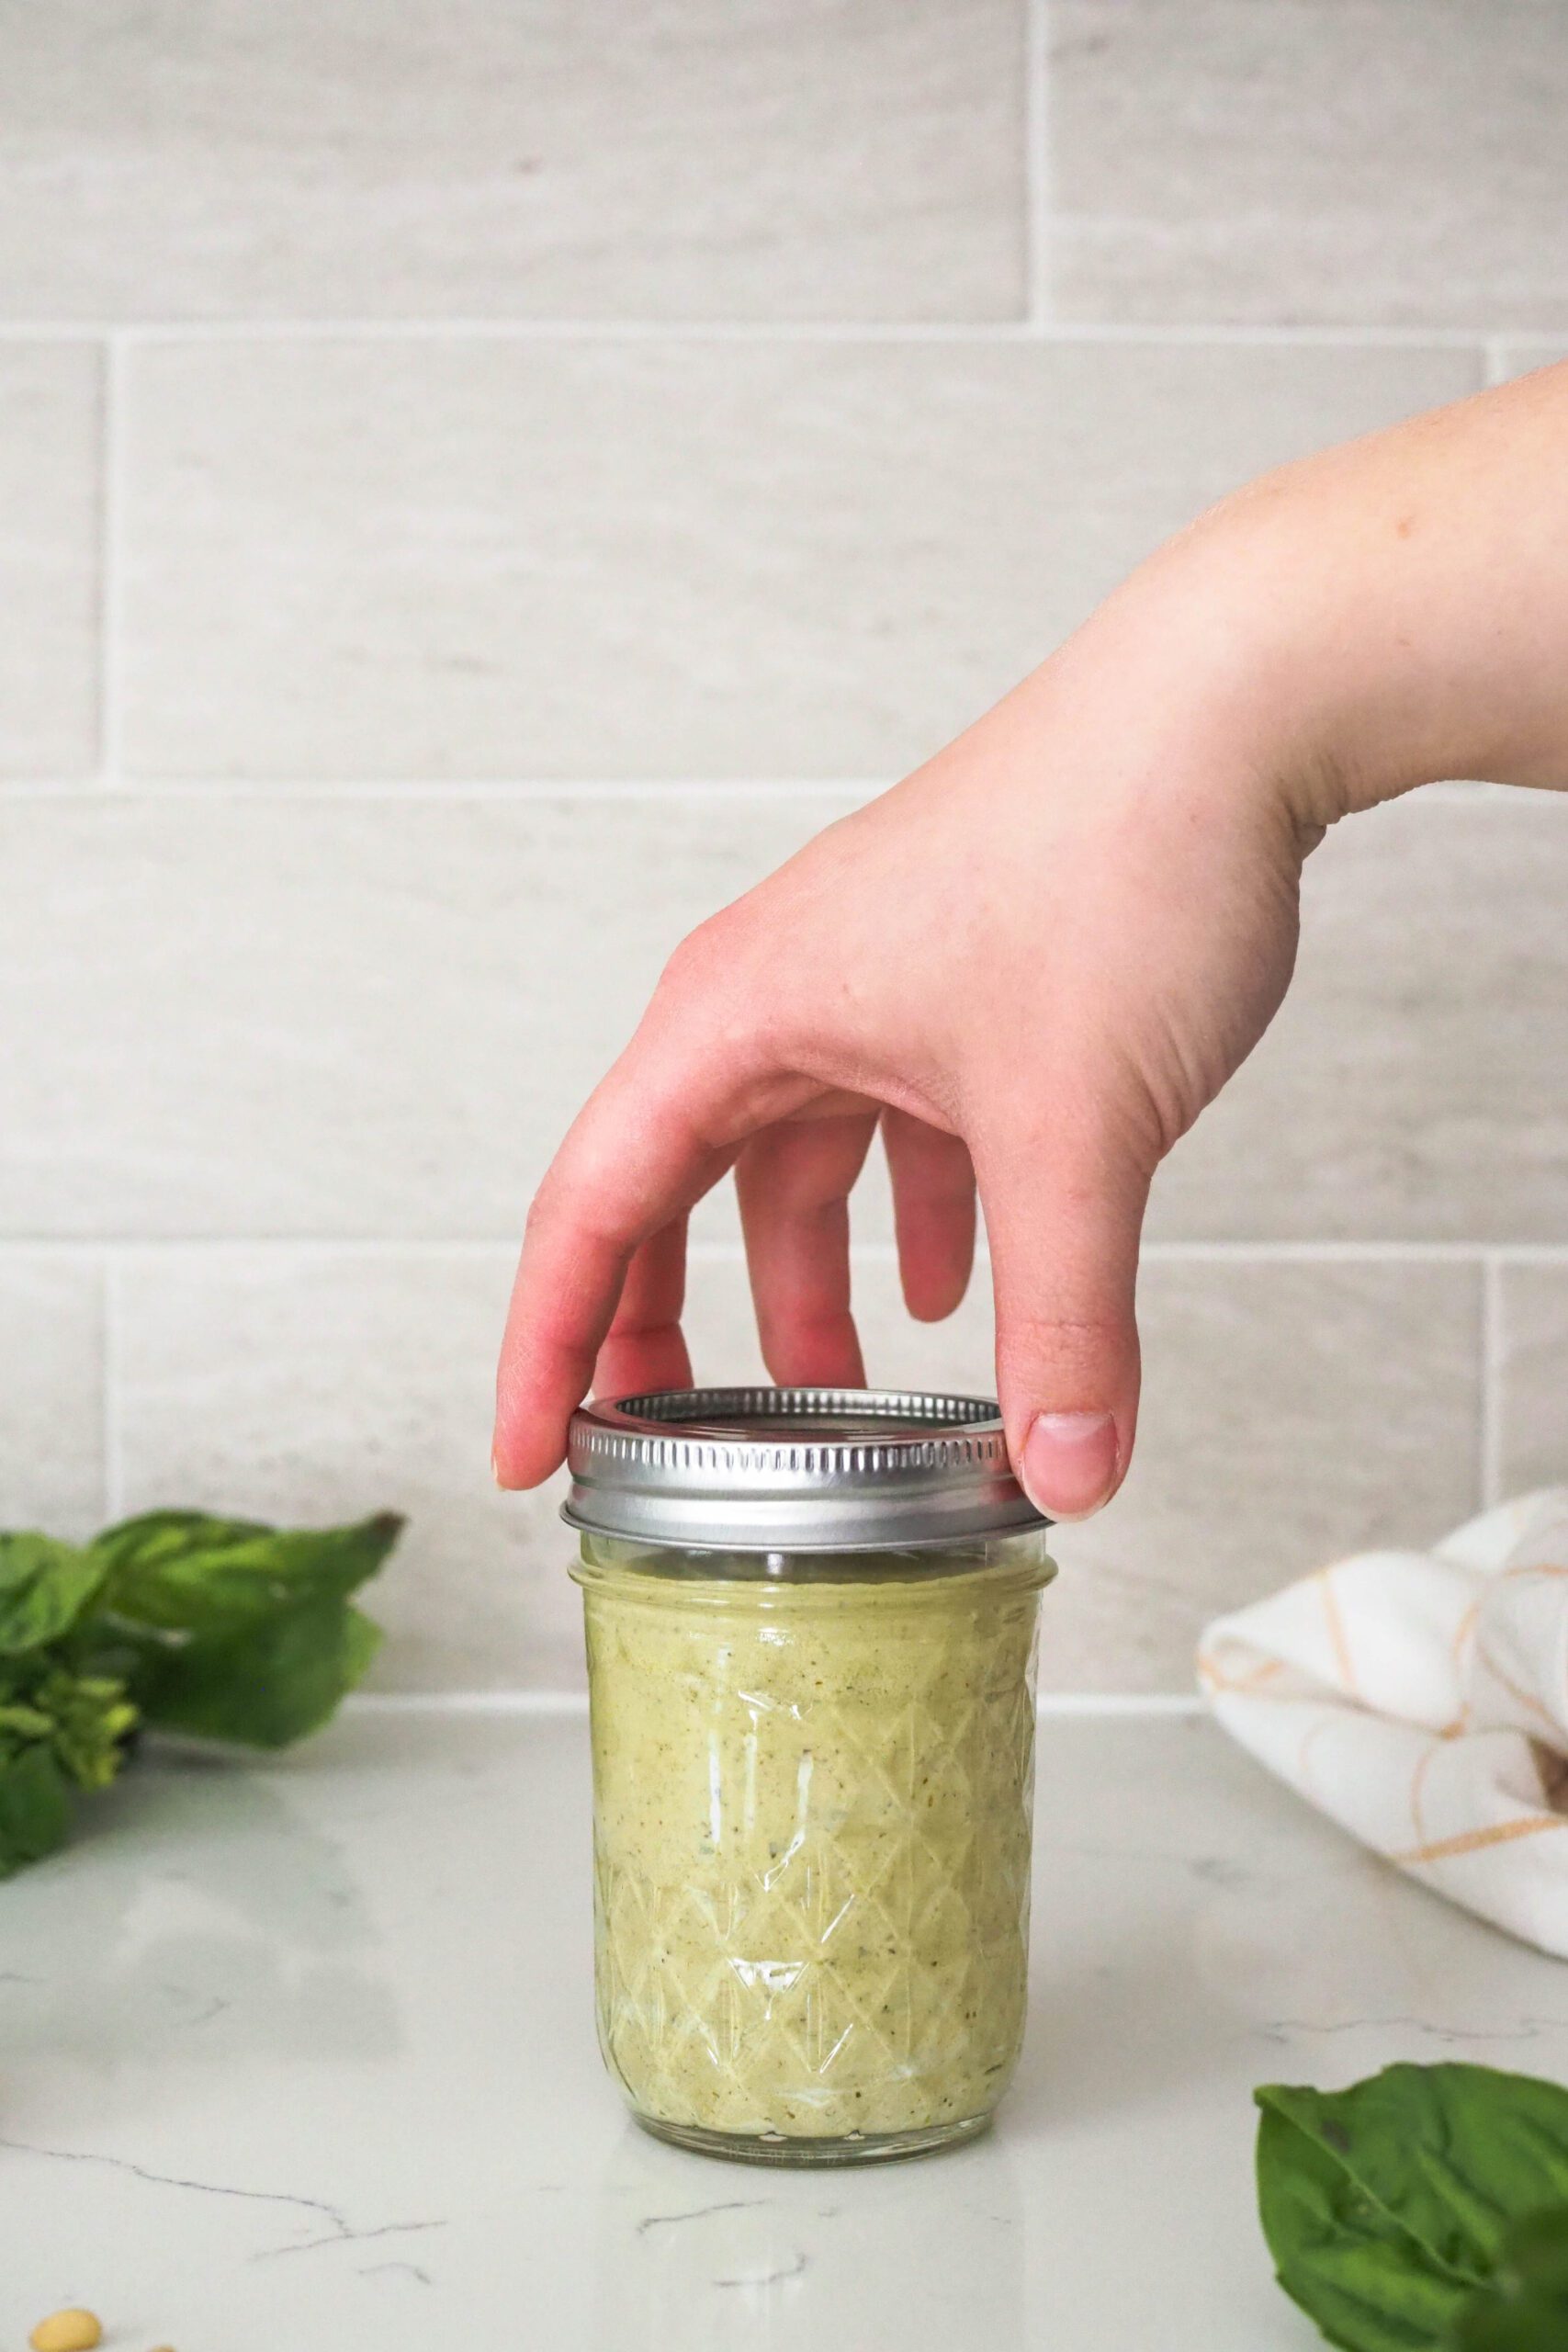 A hand screws on the lid of a jar containing creamy basil pesto.